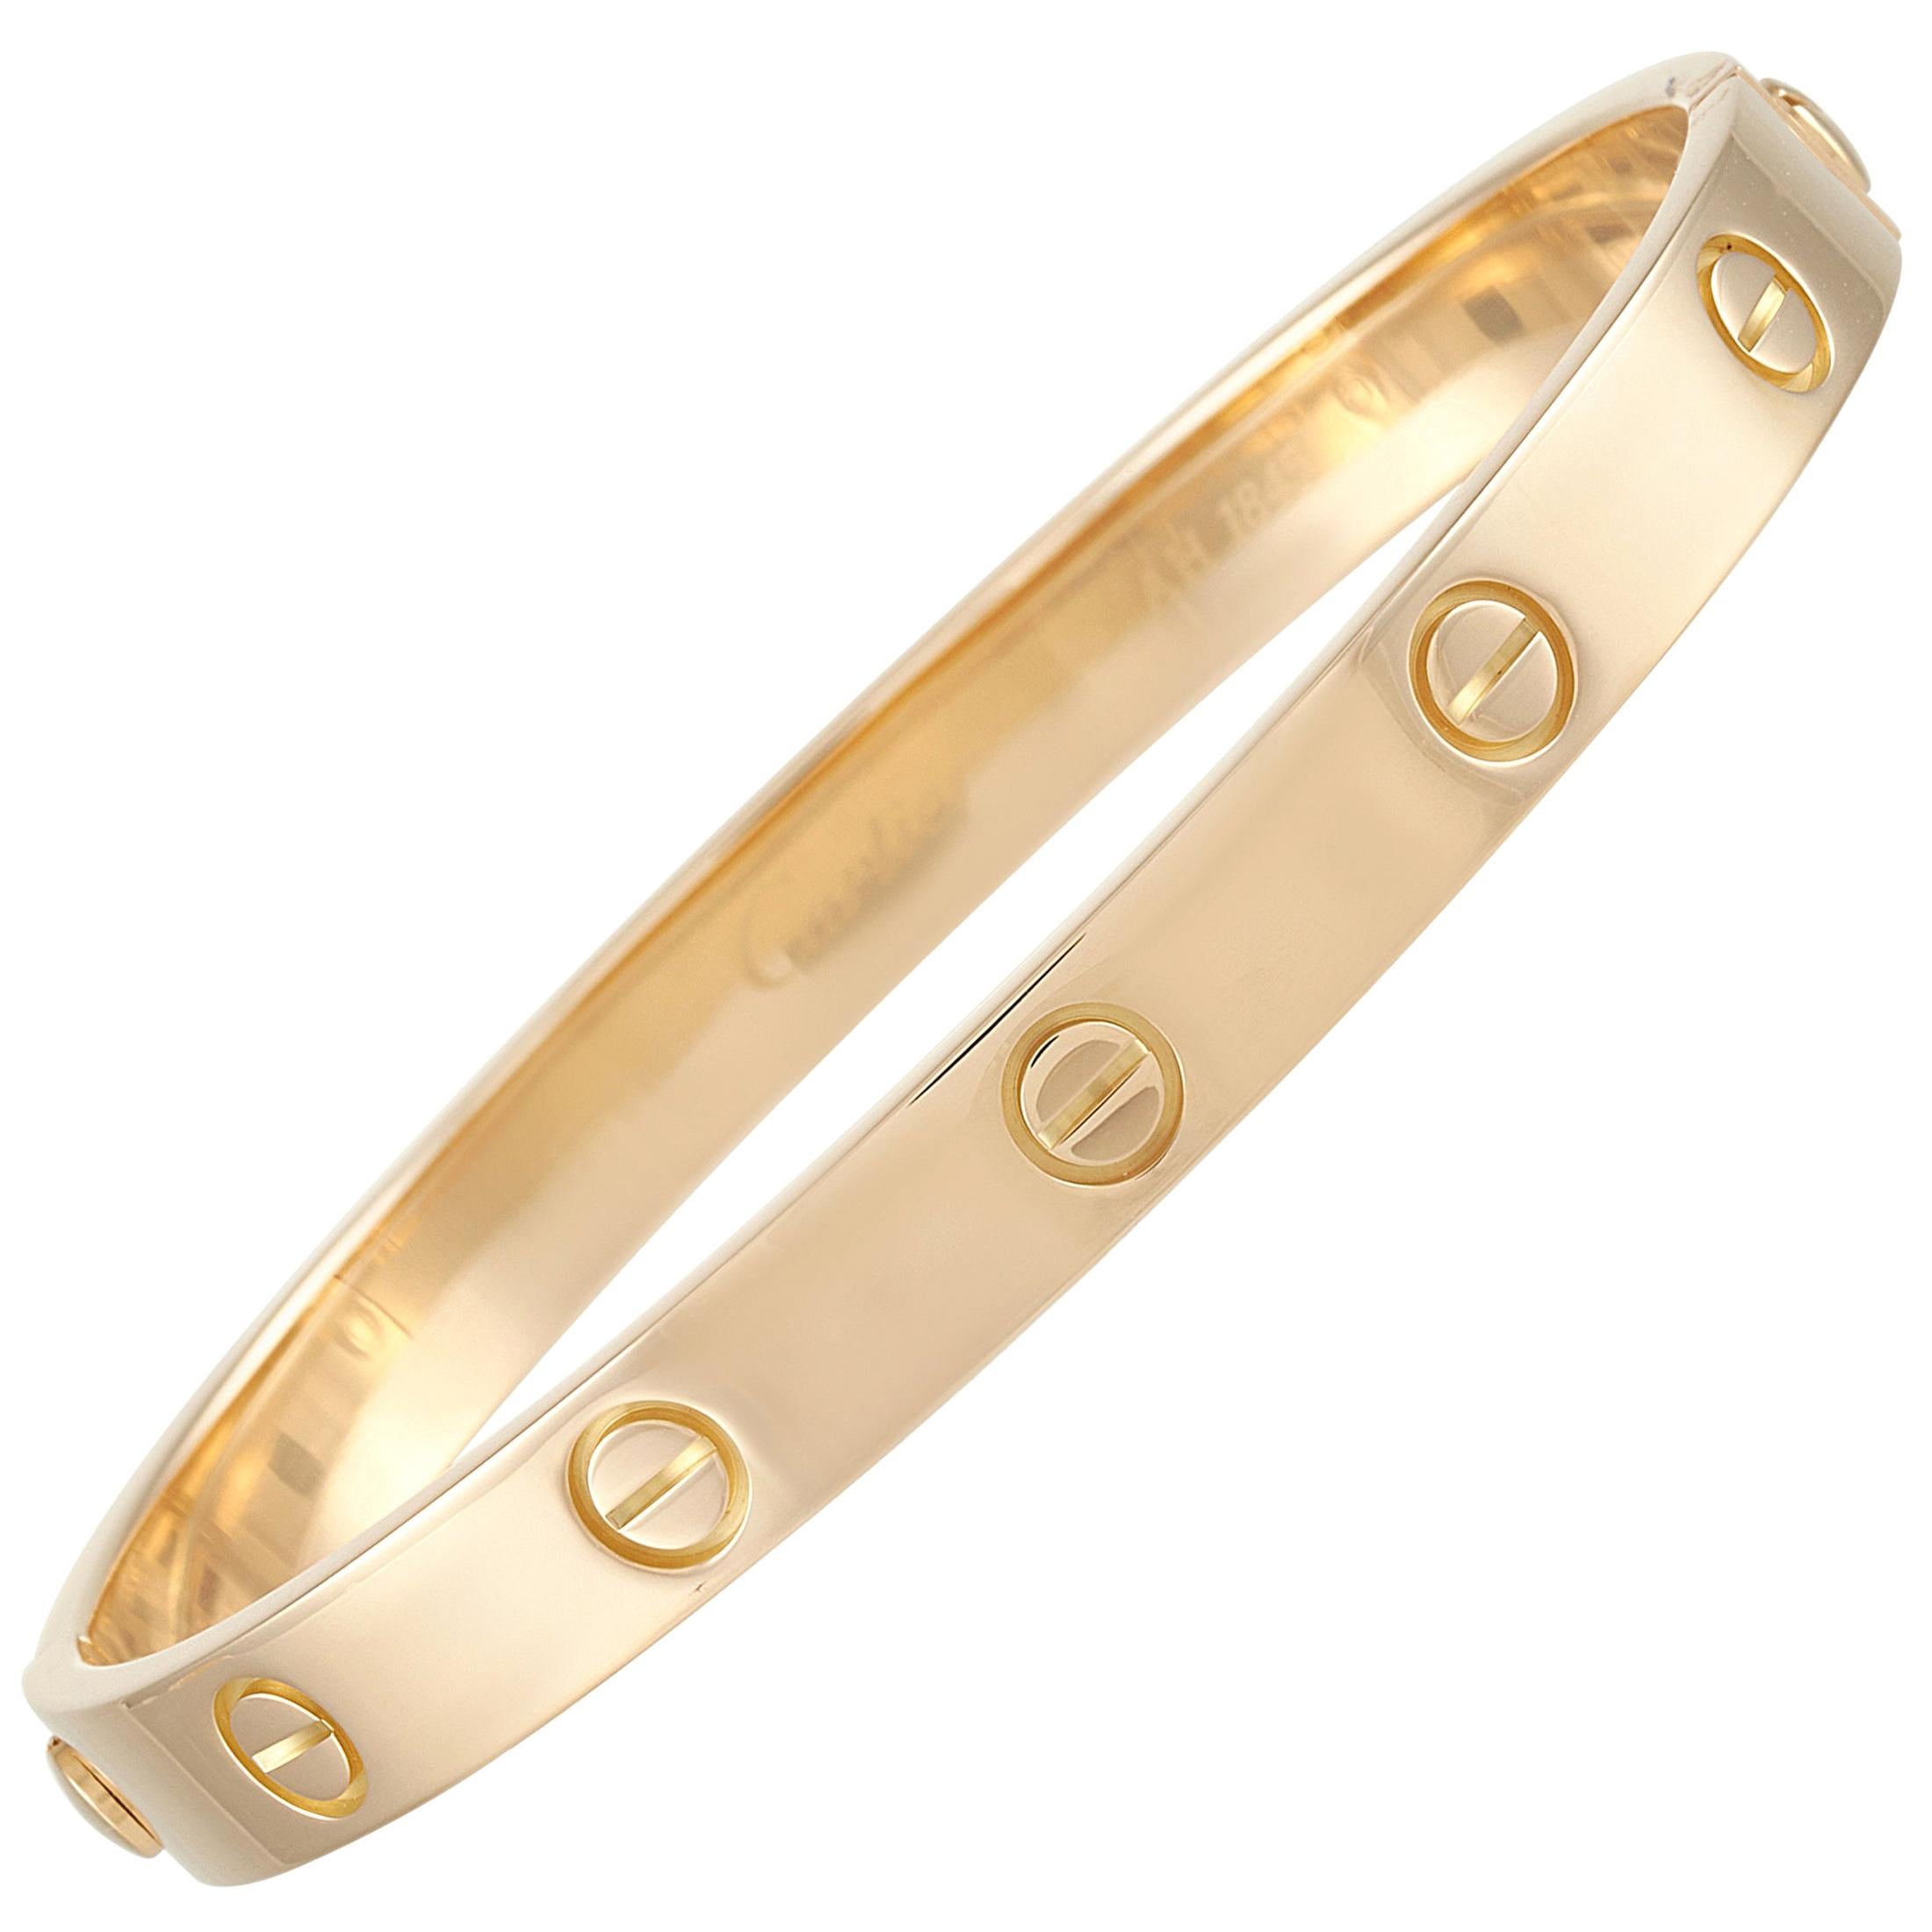 Cartier LOVE 18K Yellow Gold Bangle Bracelet with Screwdriver